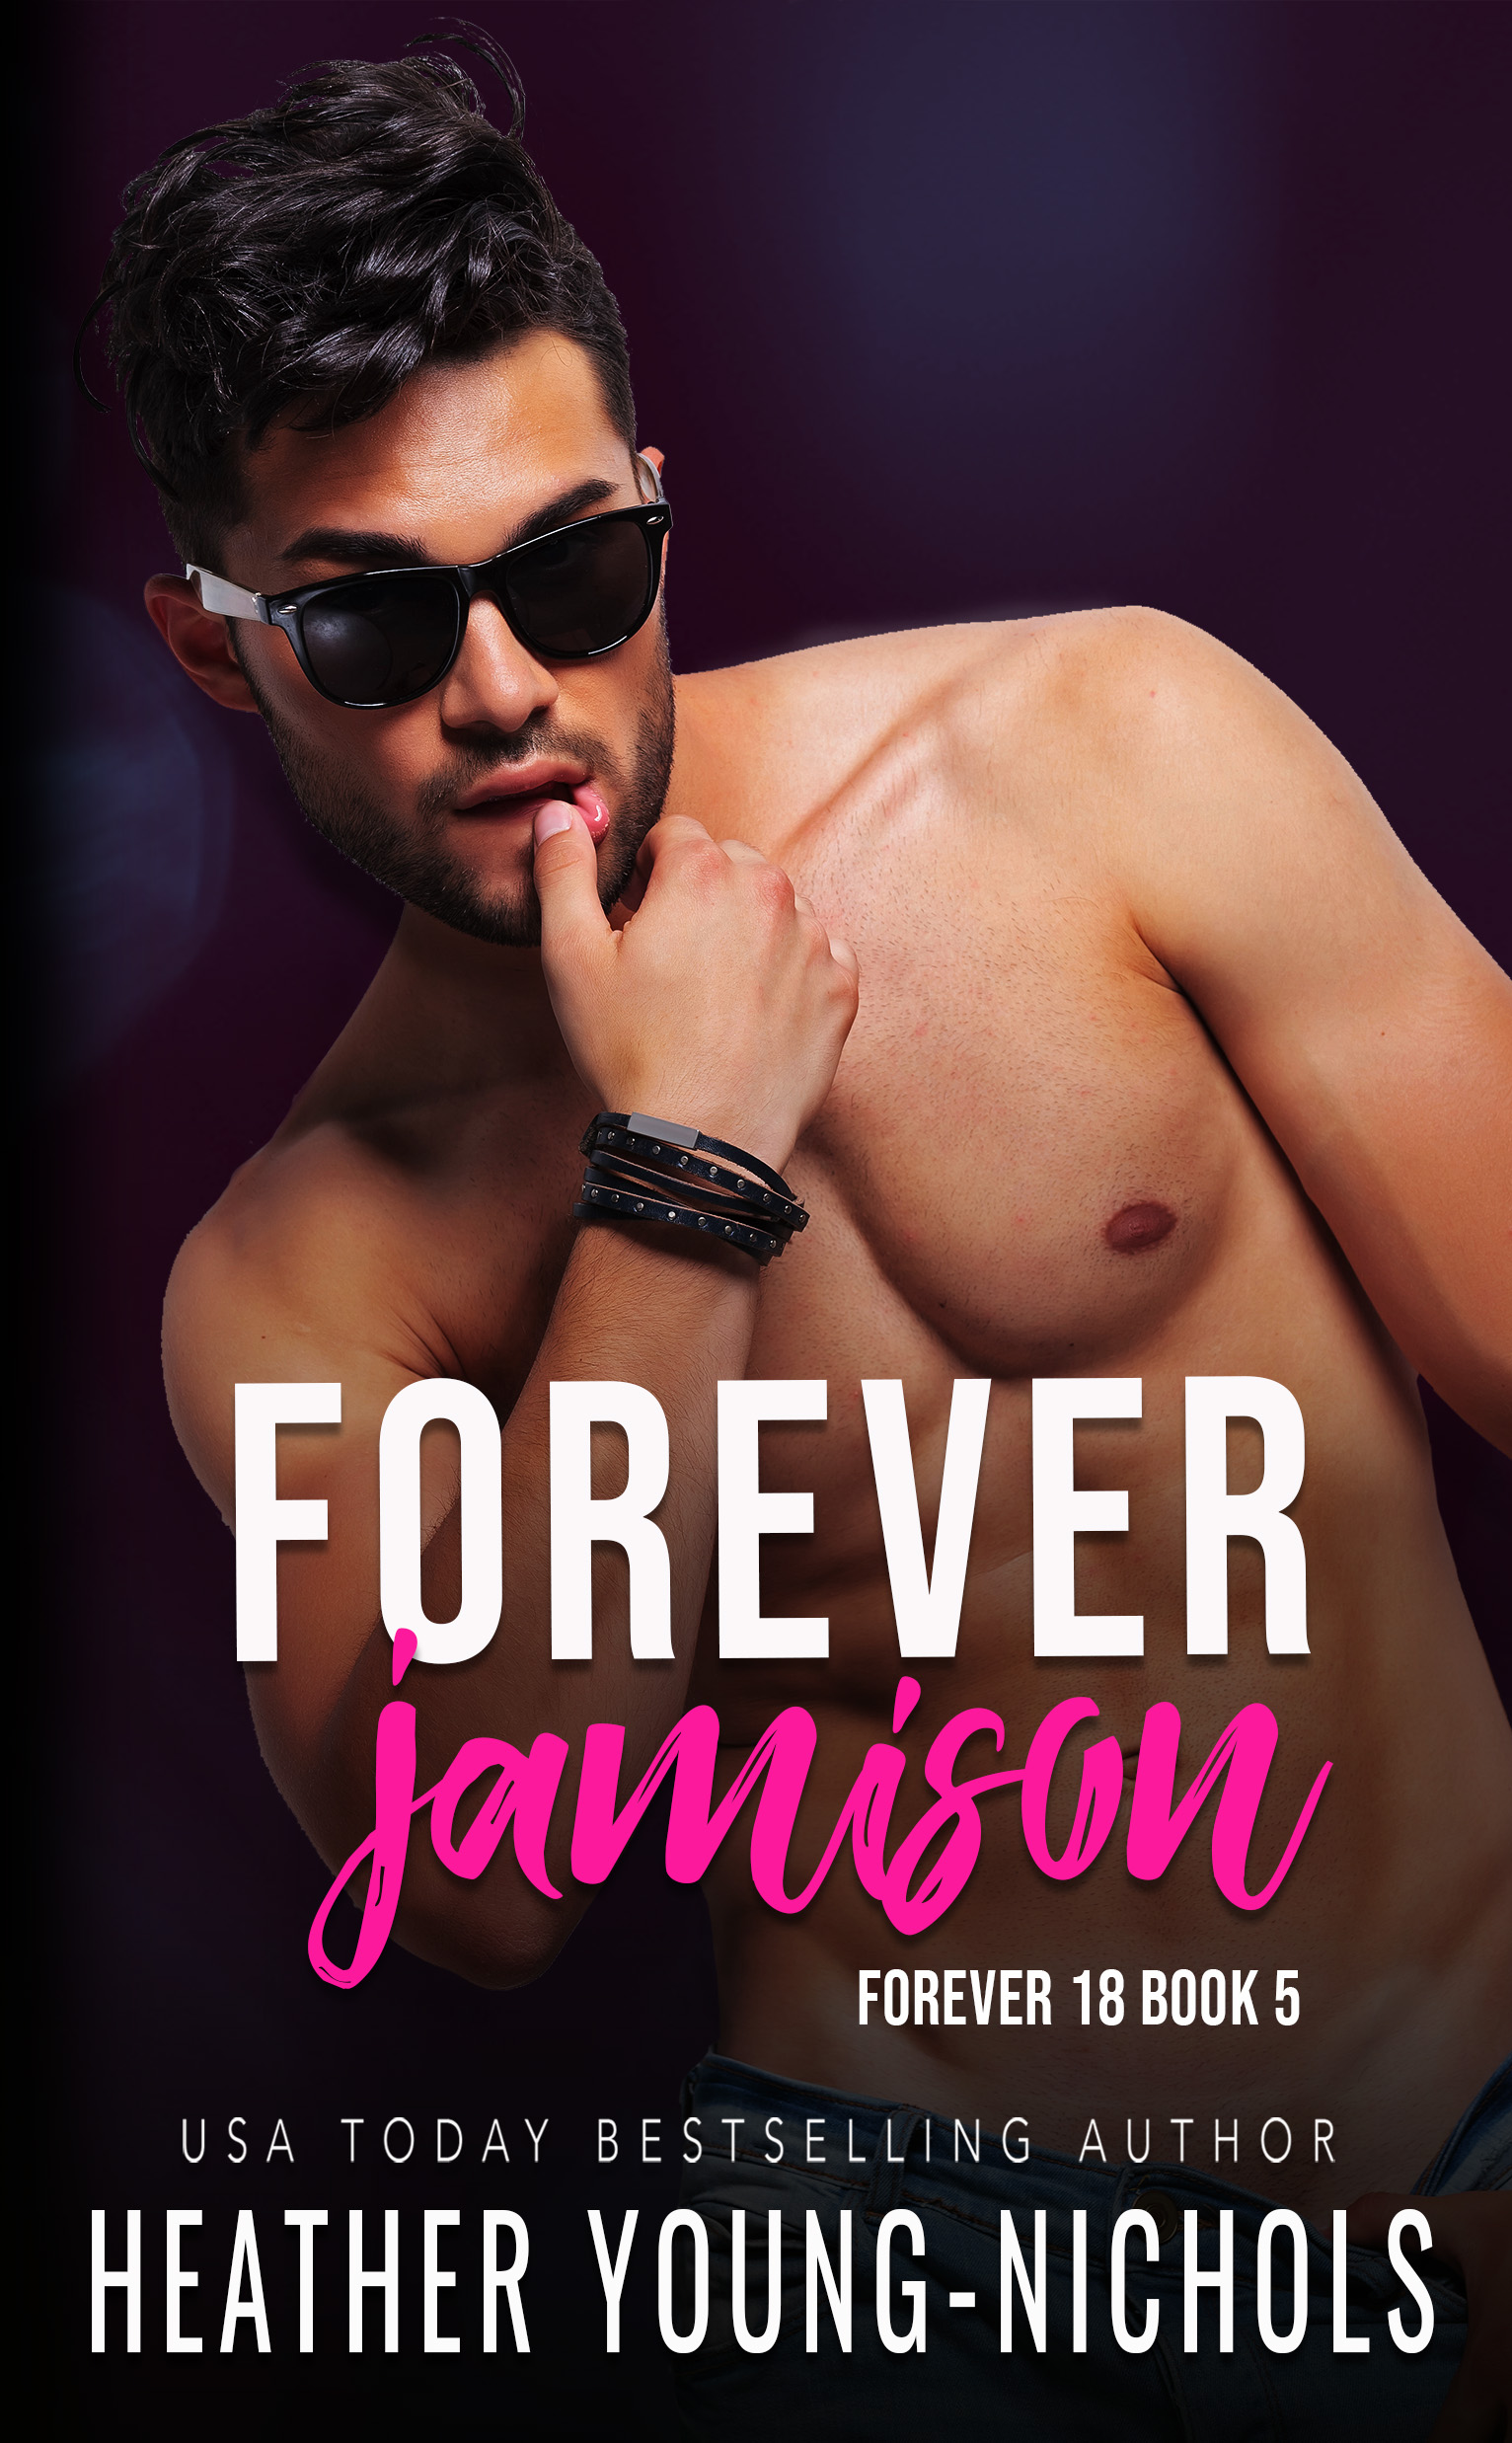 Forever Jamison by Heather Young-Nichols